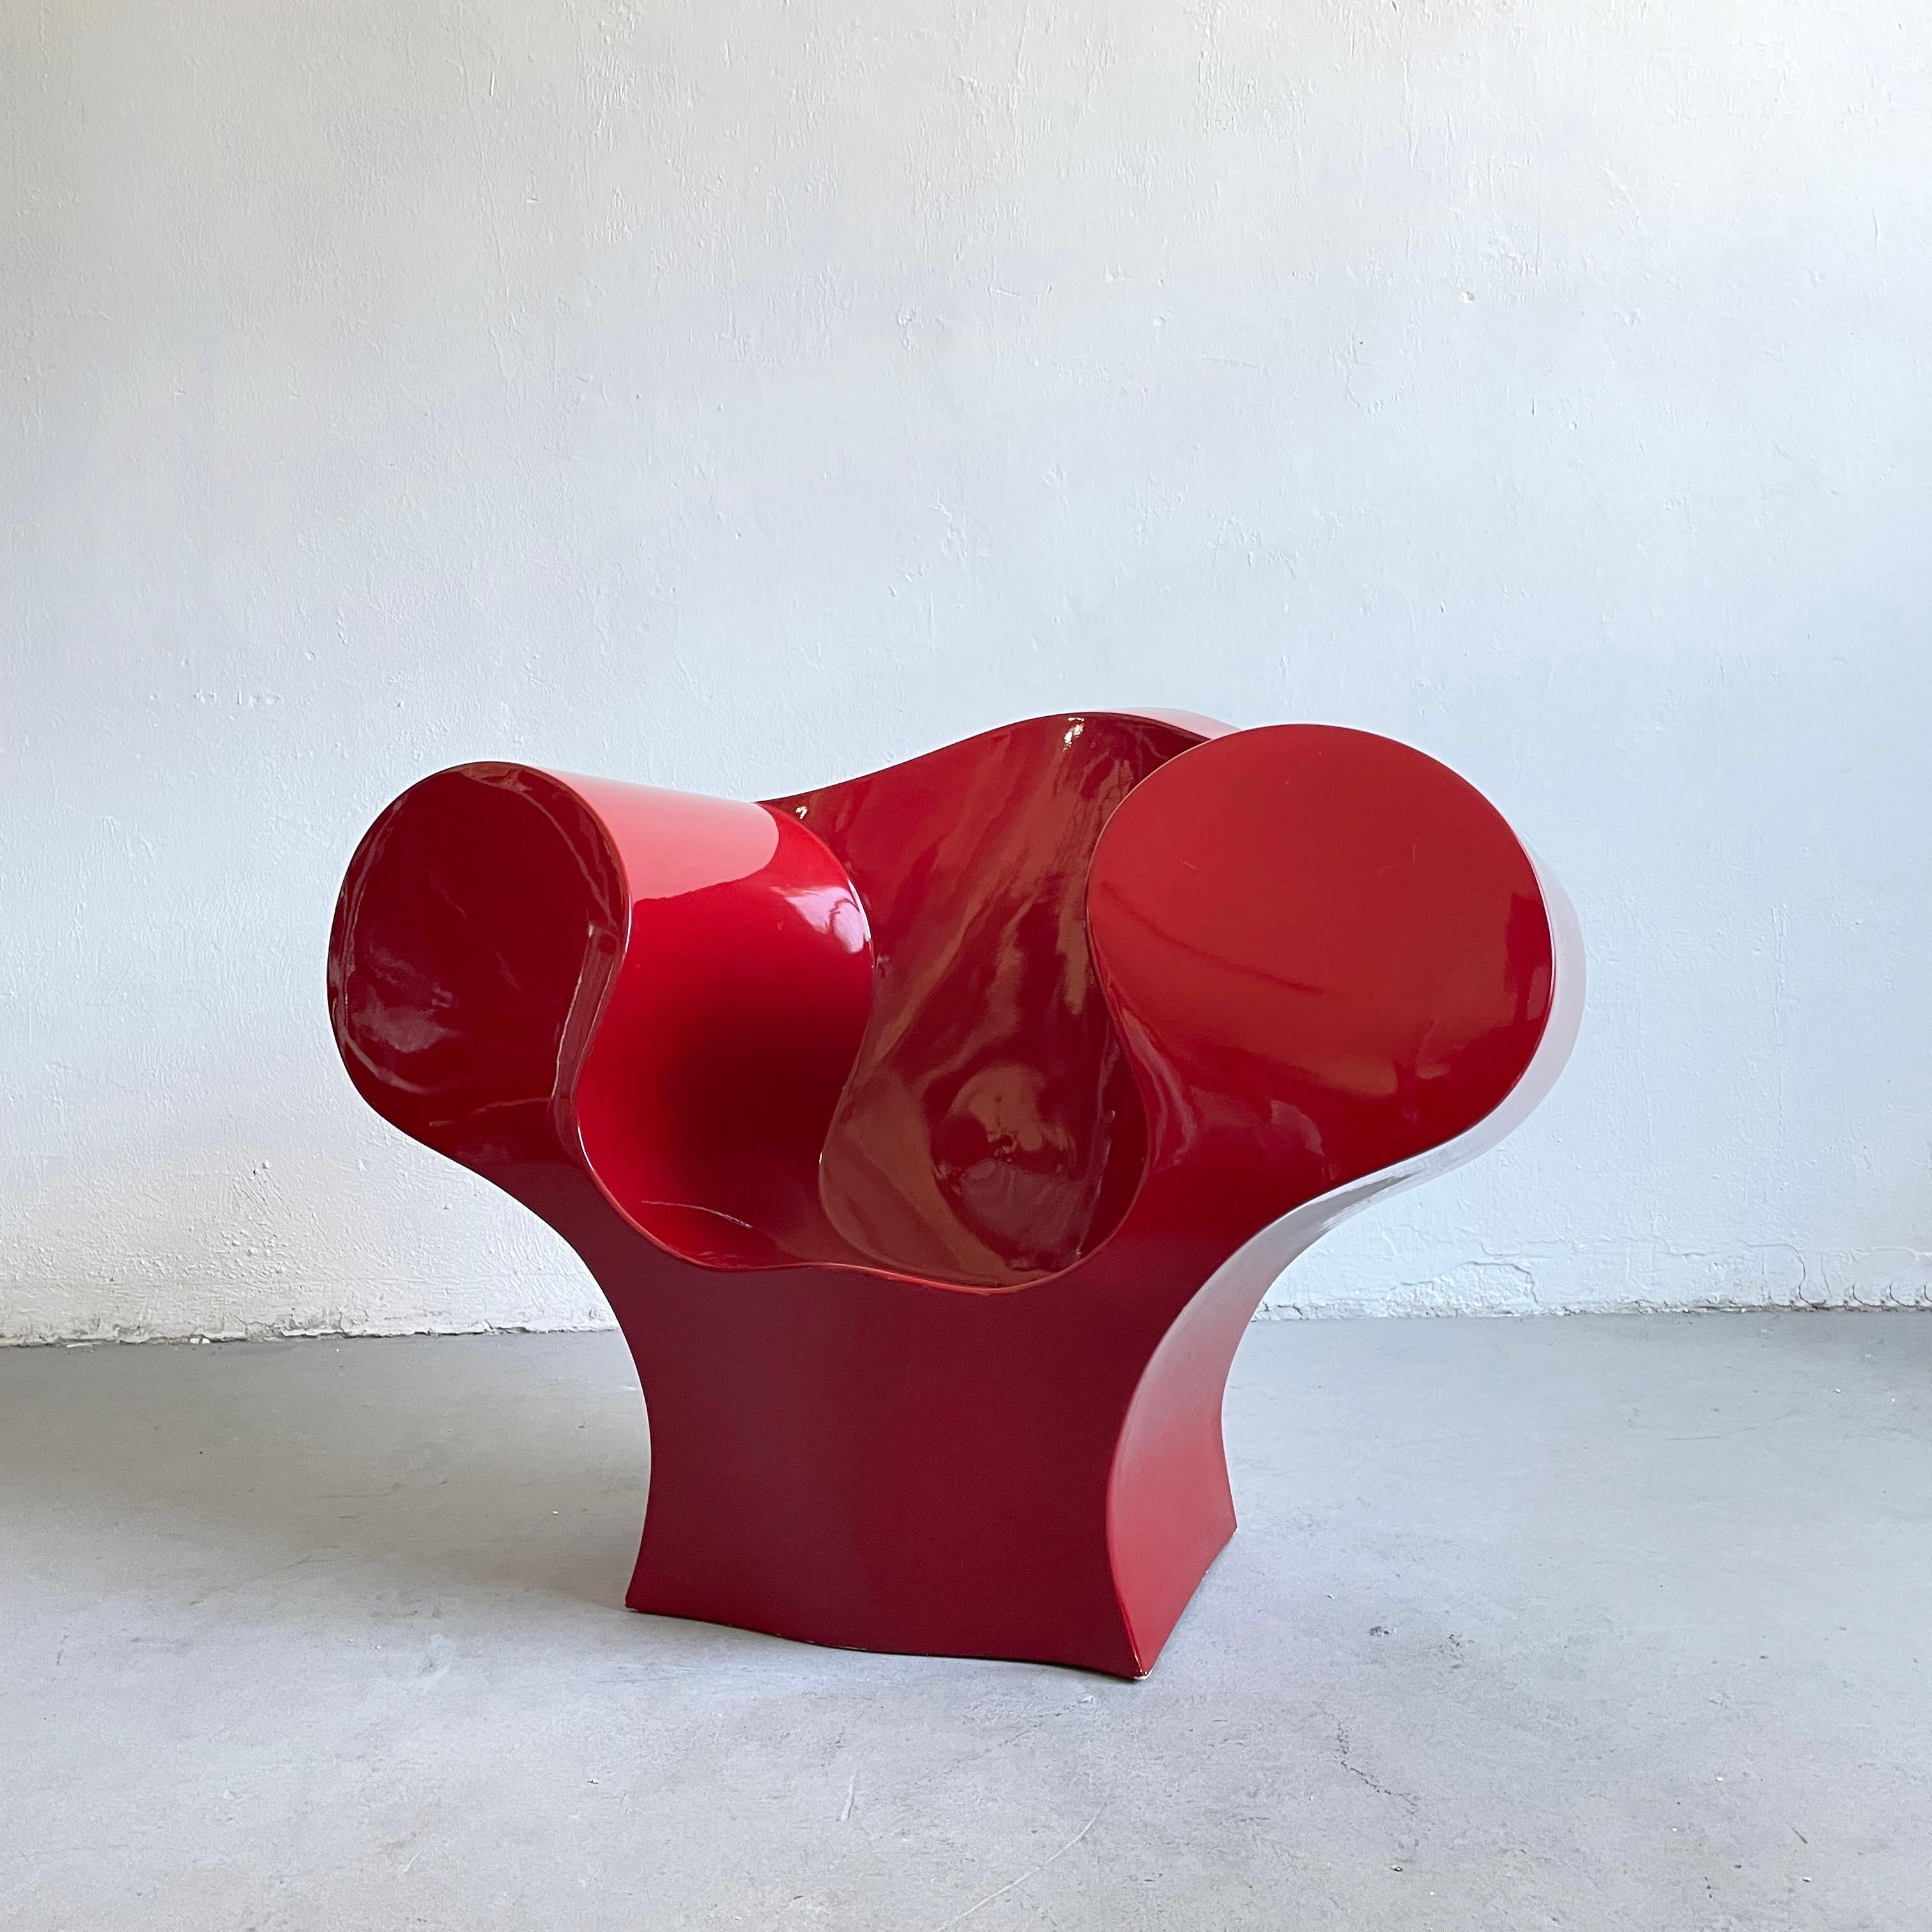 Iconic postmodern Big-E ( Big Easy ) armchair designed by Ron Arad in 1991

This is a lacquered version produced by Italian company Moroso in the early 2000s

The chair is in good condition and has some light scratch marks and small wear and use